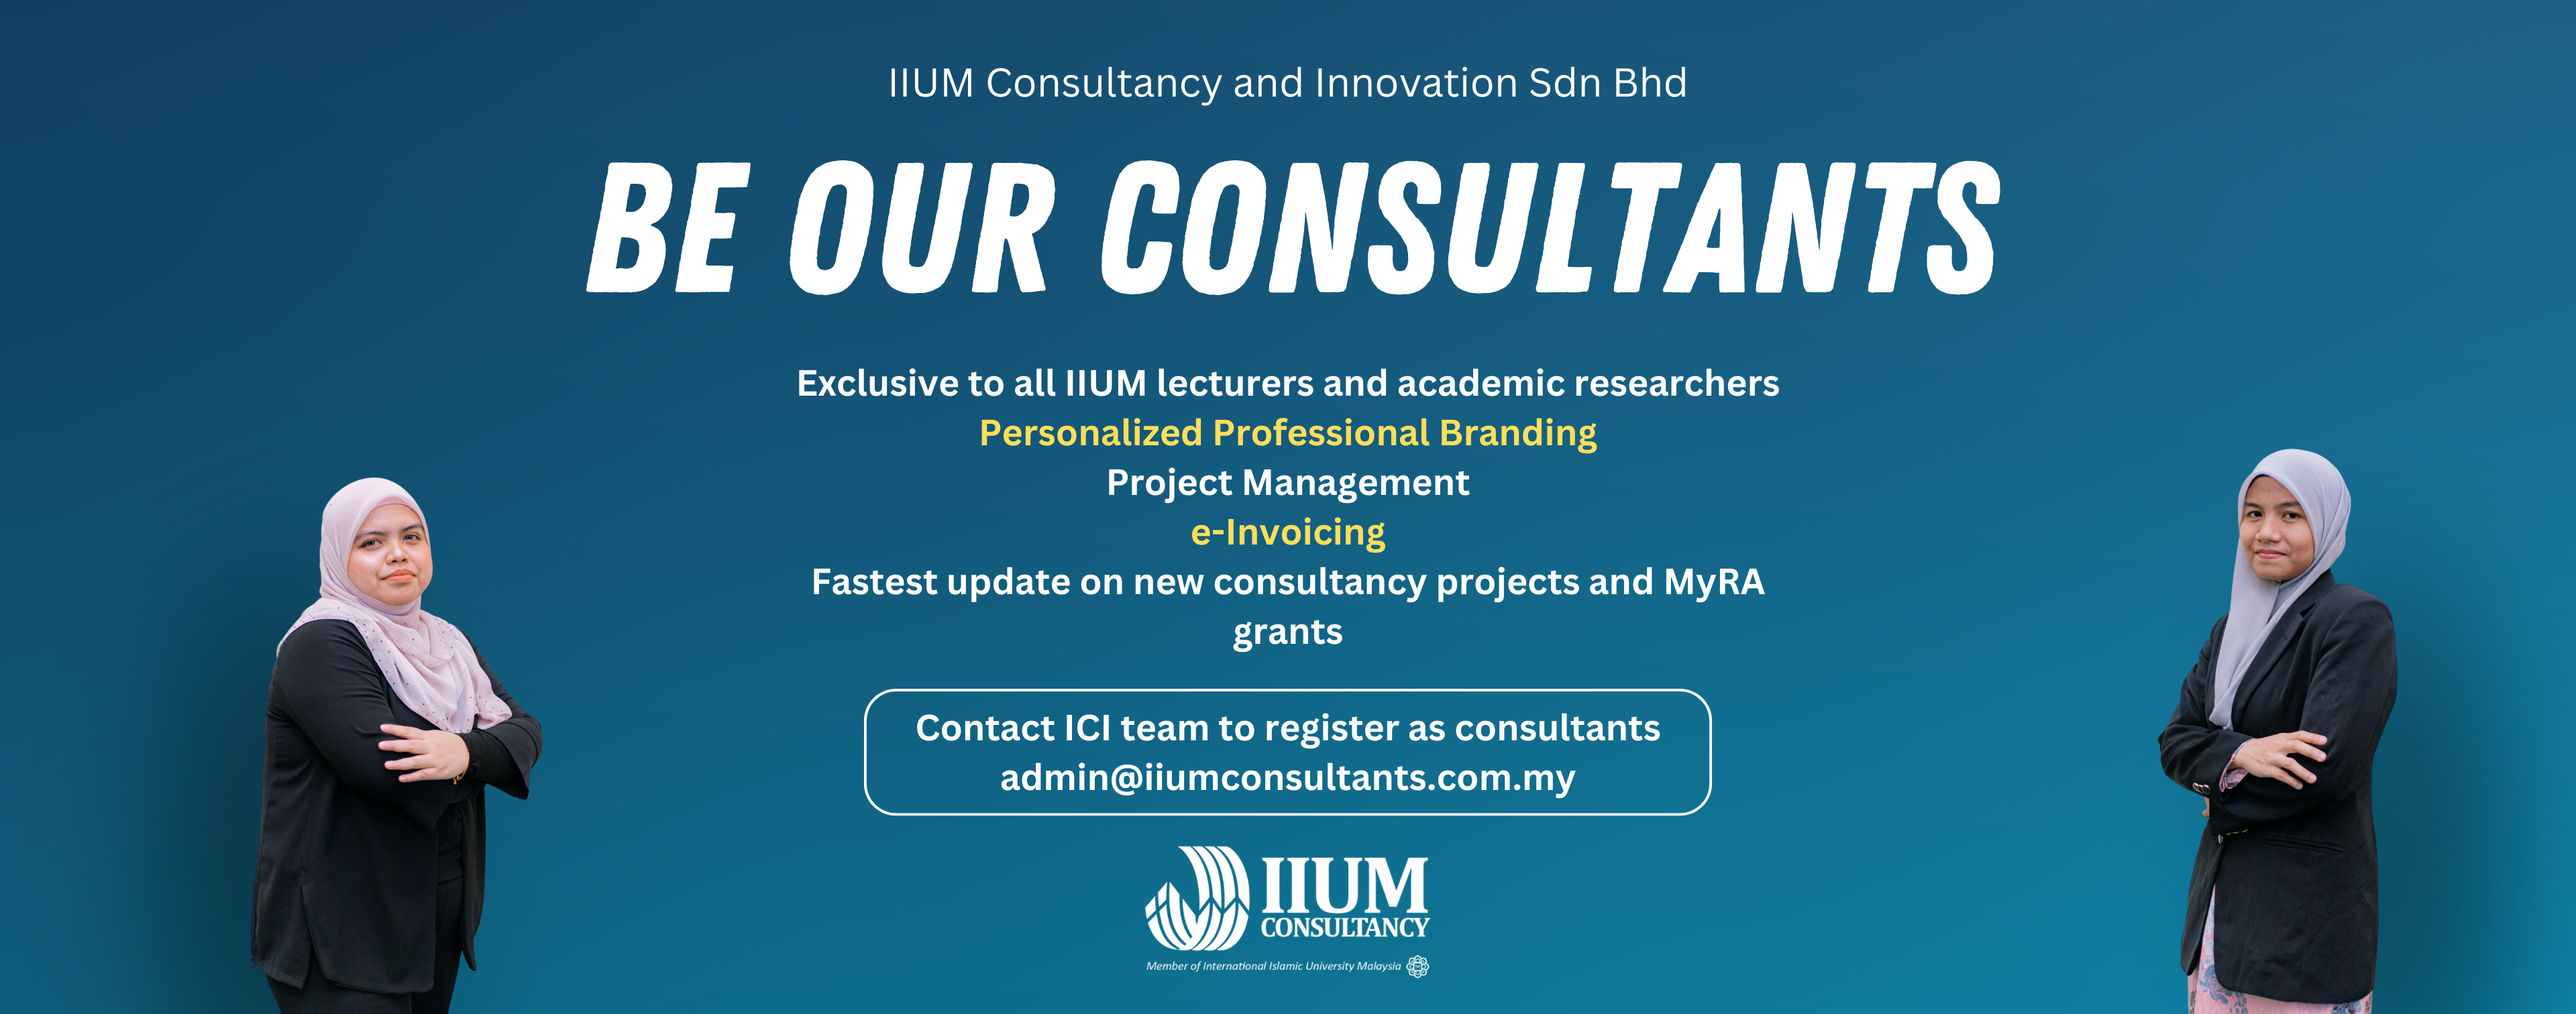 ICI BECOME OUR CONSULTANT